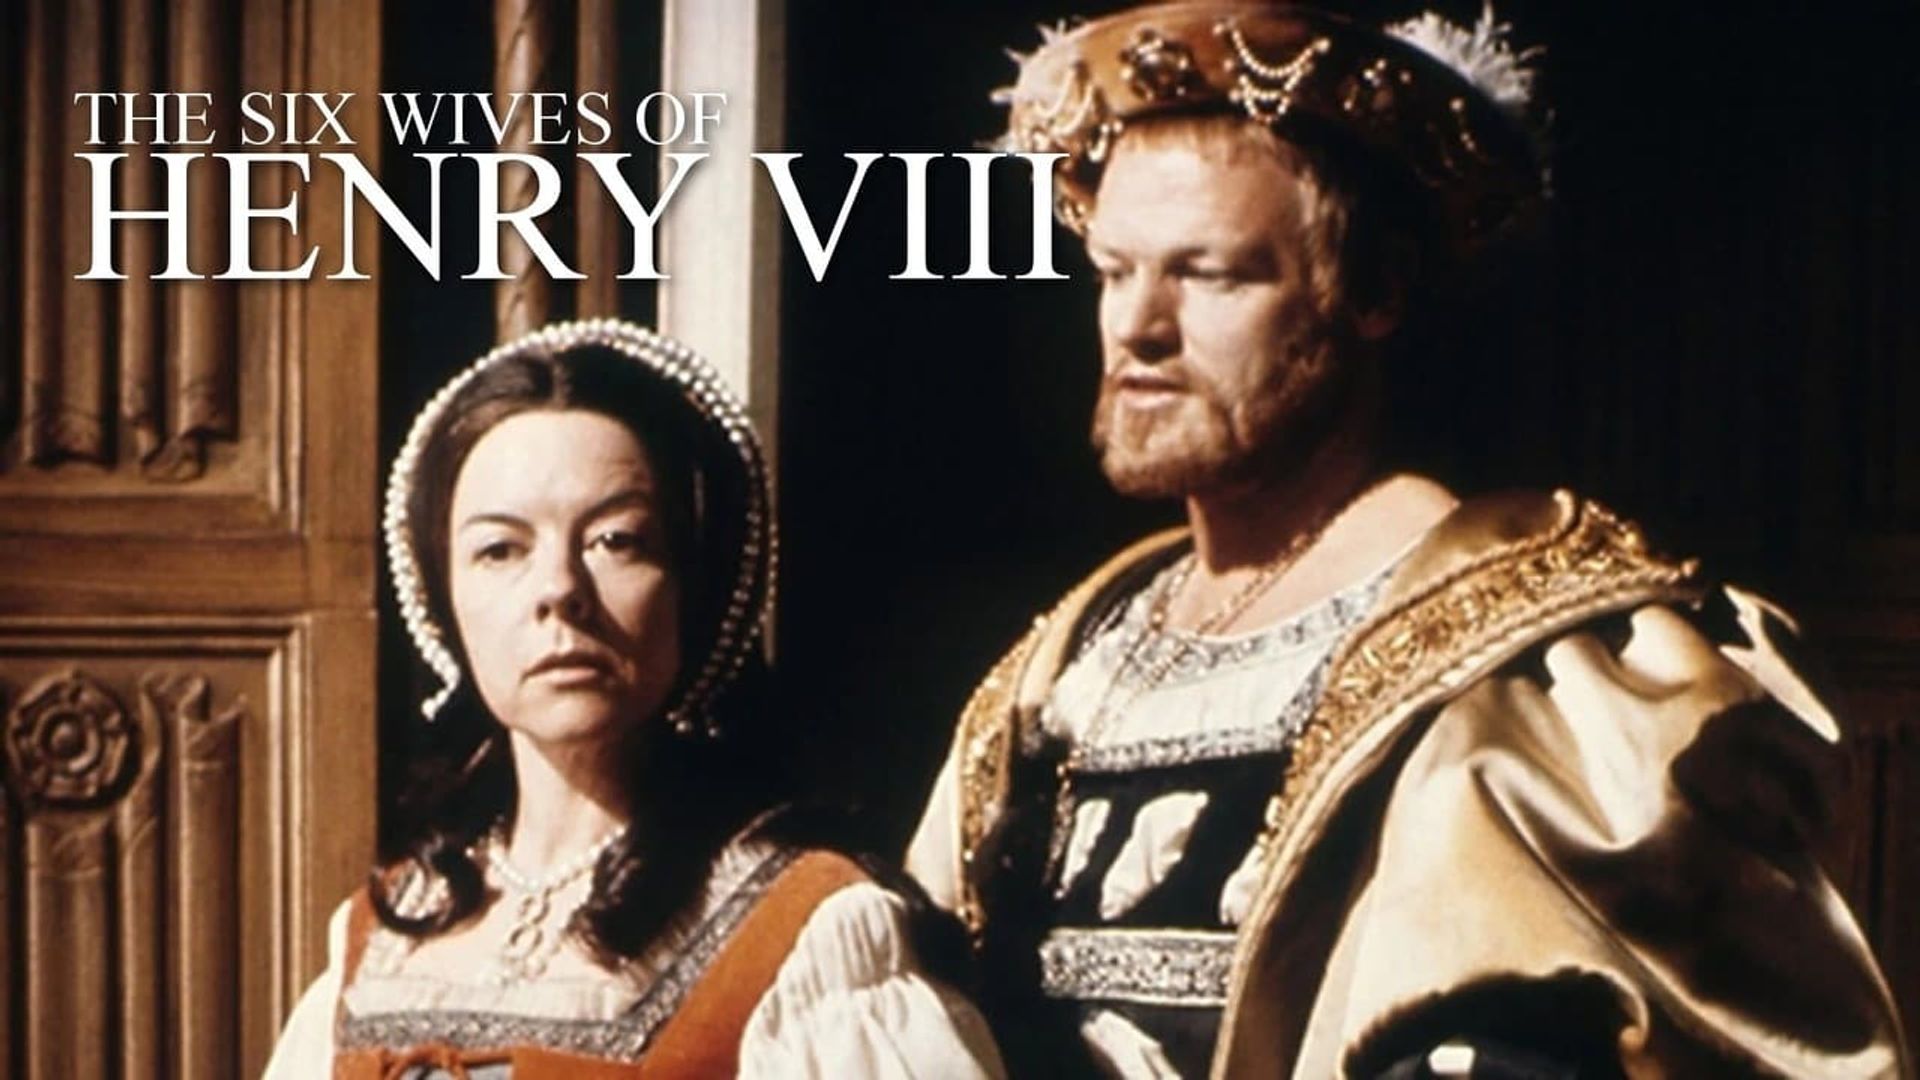 The Six Wives of Henry VIII background